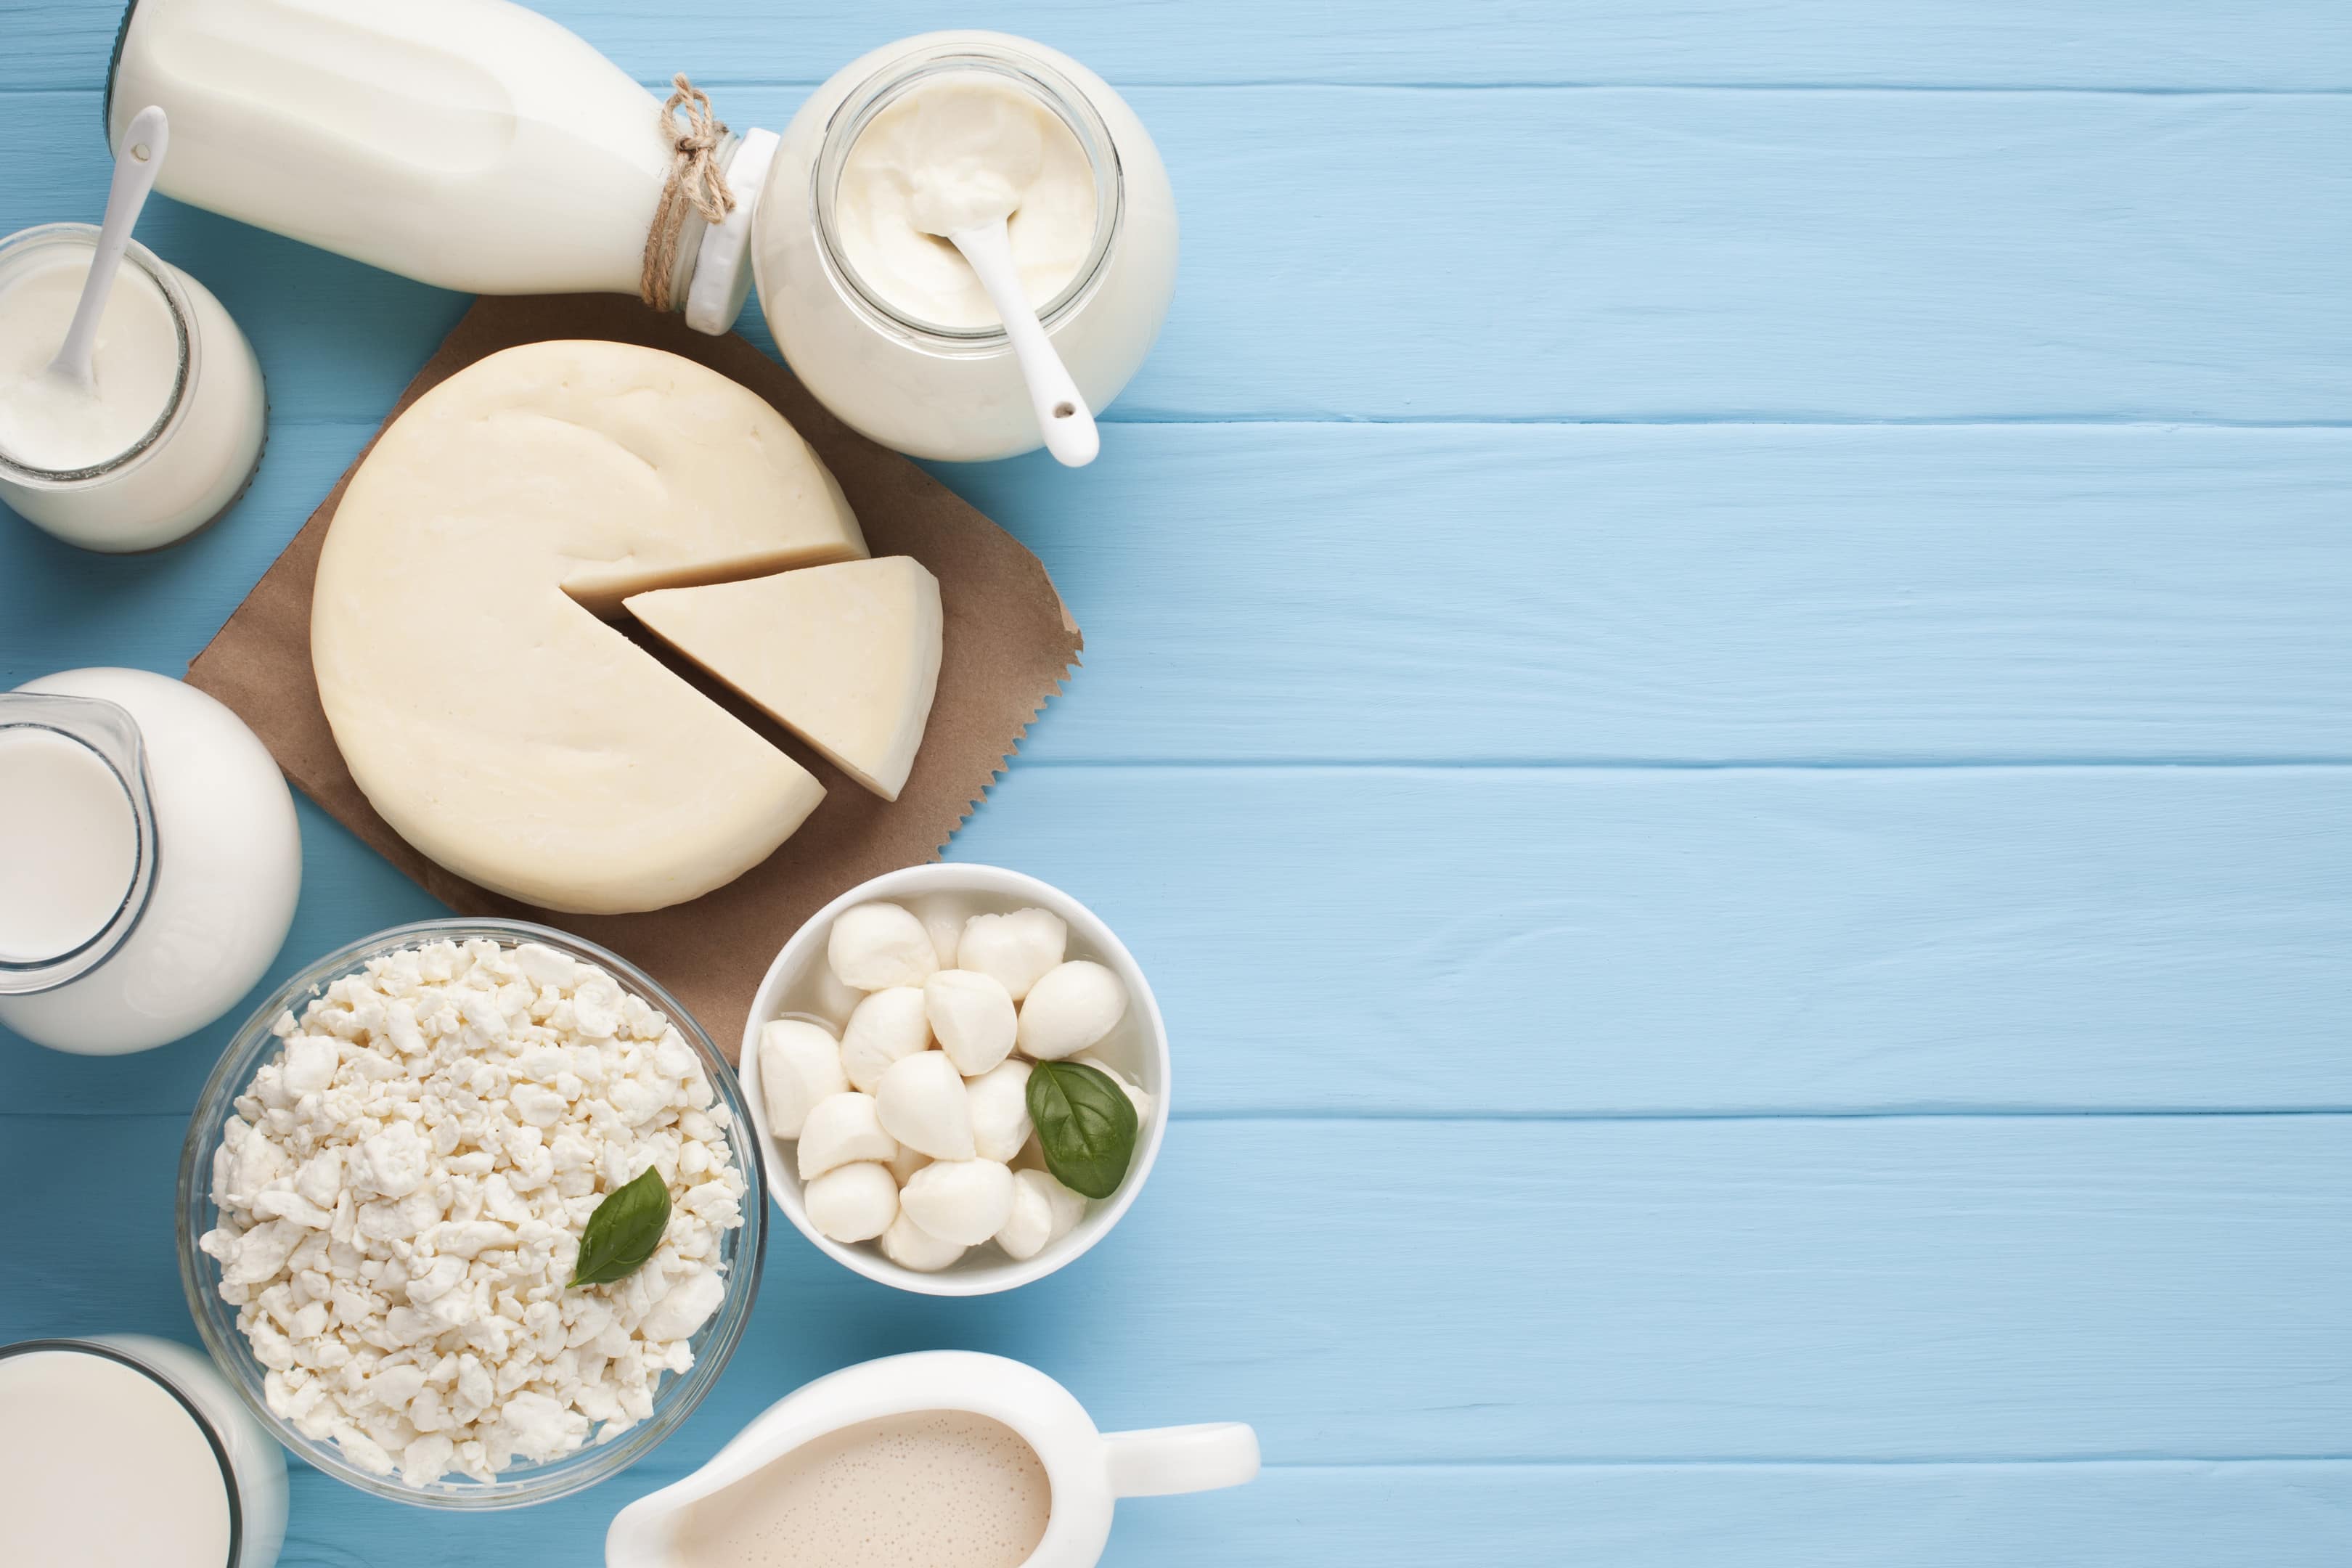 Jars of milk and dairy products on our list of foods to avoid with gallbladder issues